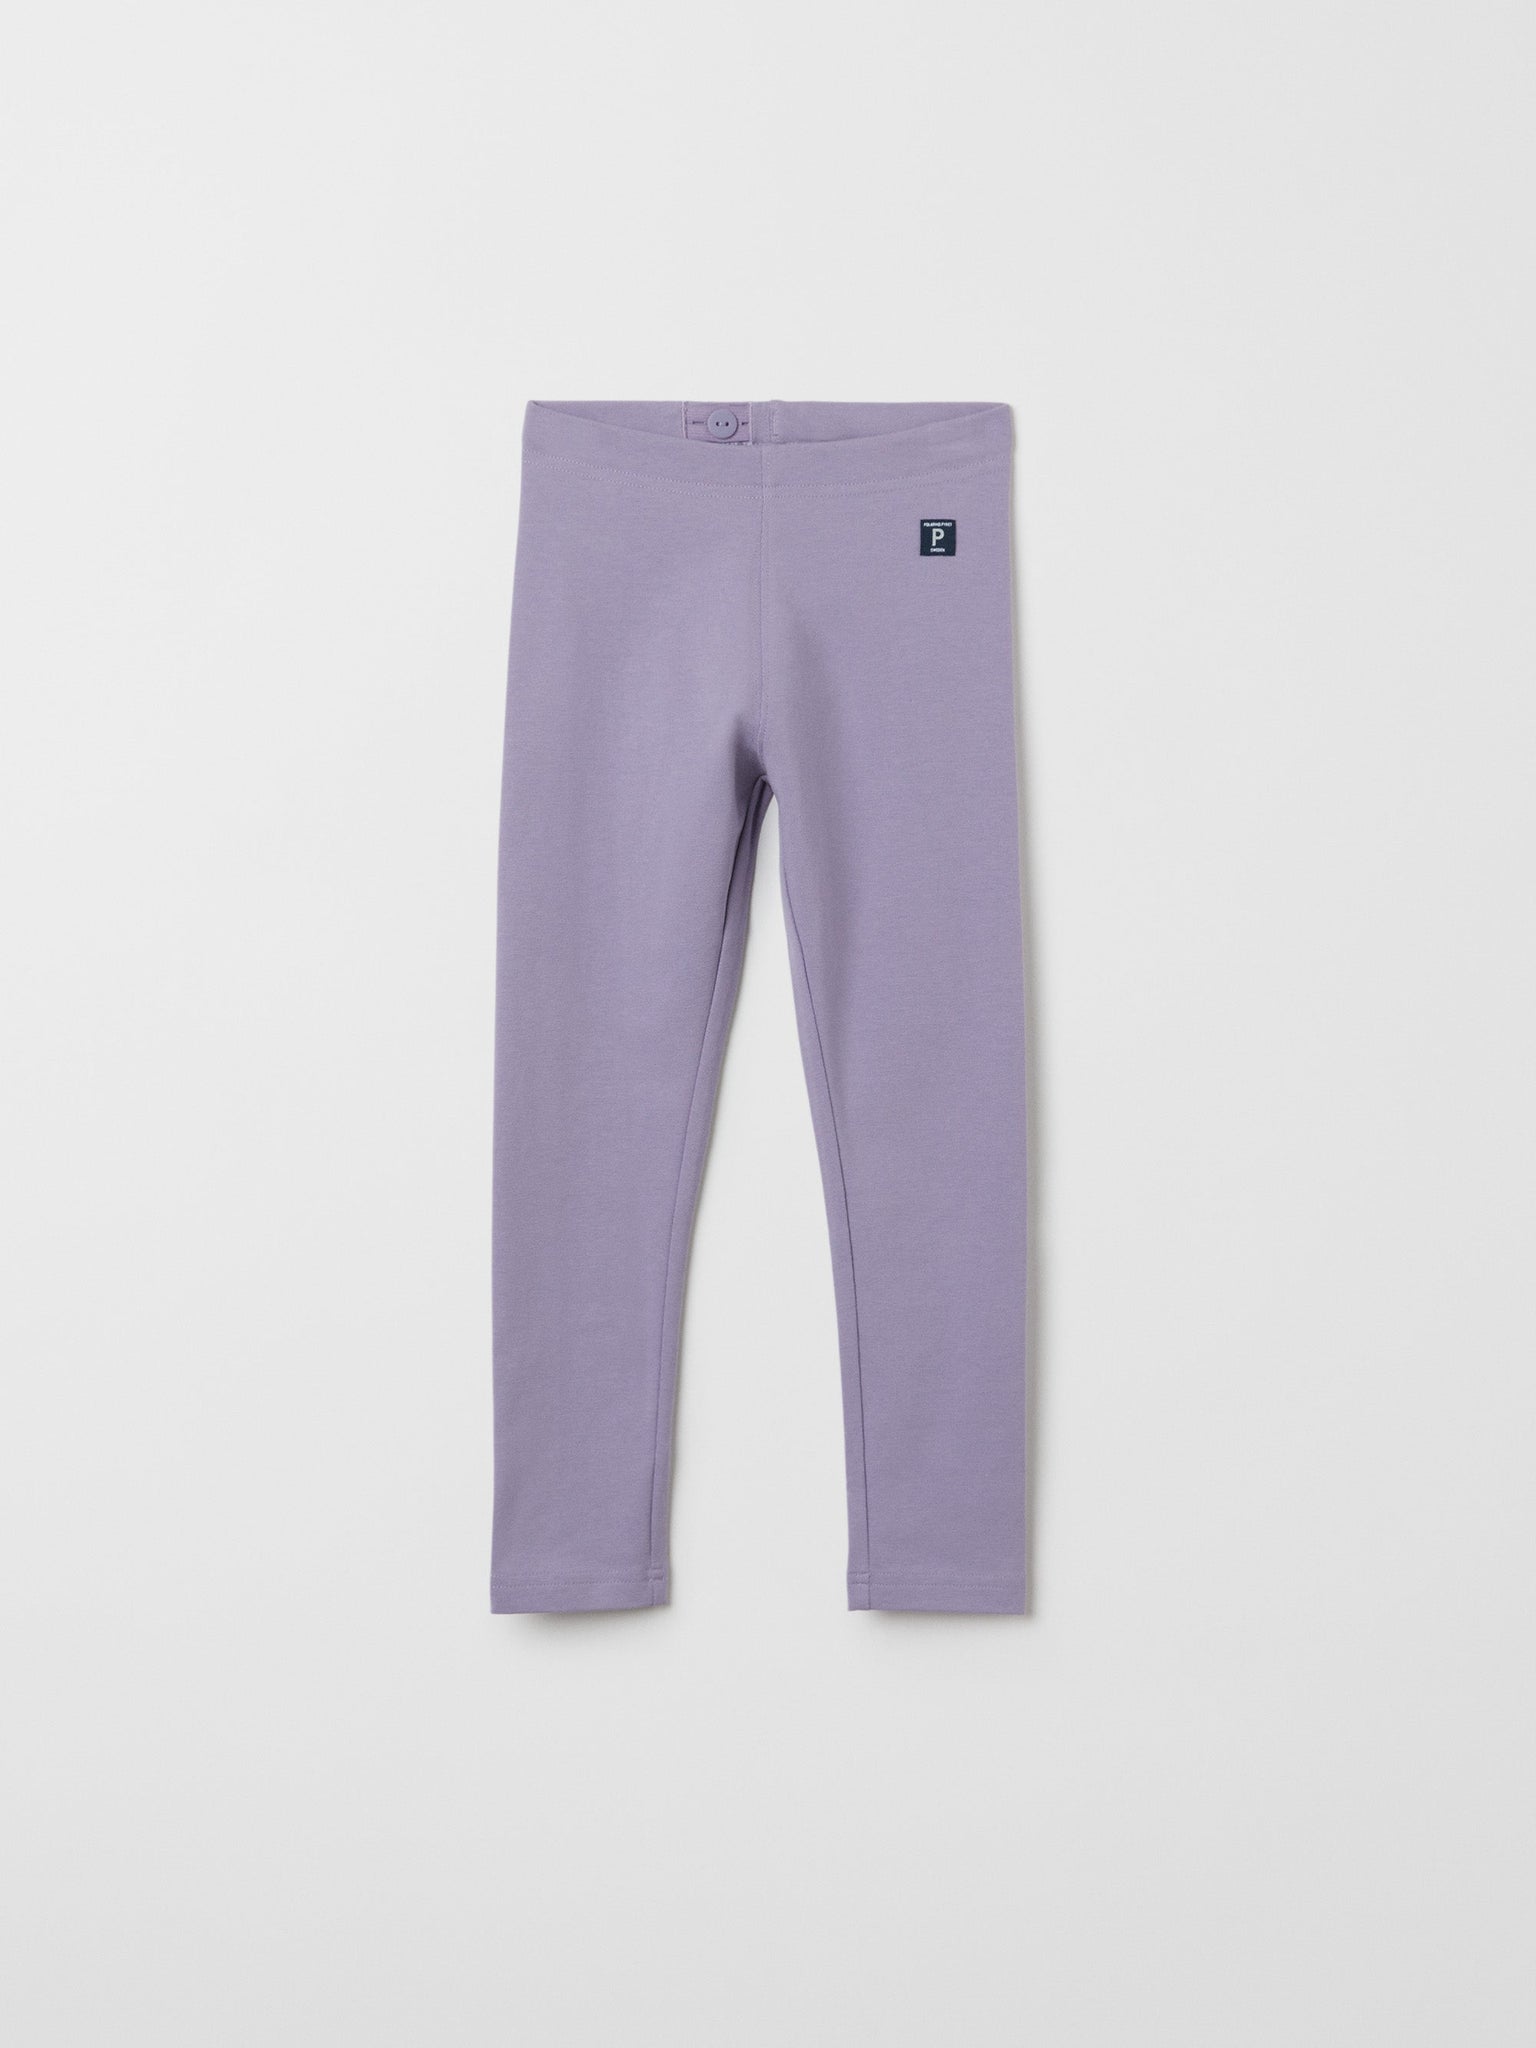 Organic Cotton Purple Kids Leggings from the Polarn O. Pyret kidswear collection. Clothes made using sustainably sourced materials.